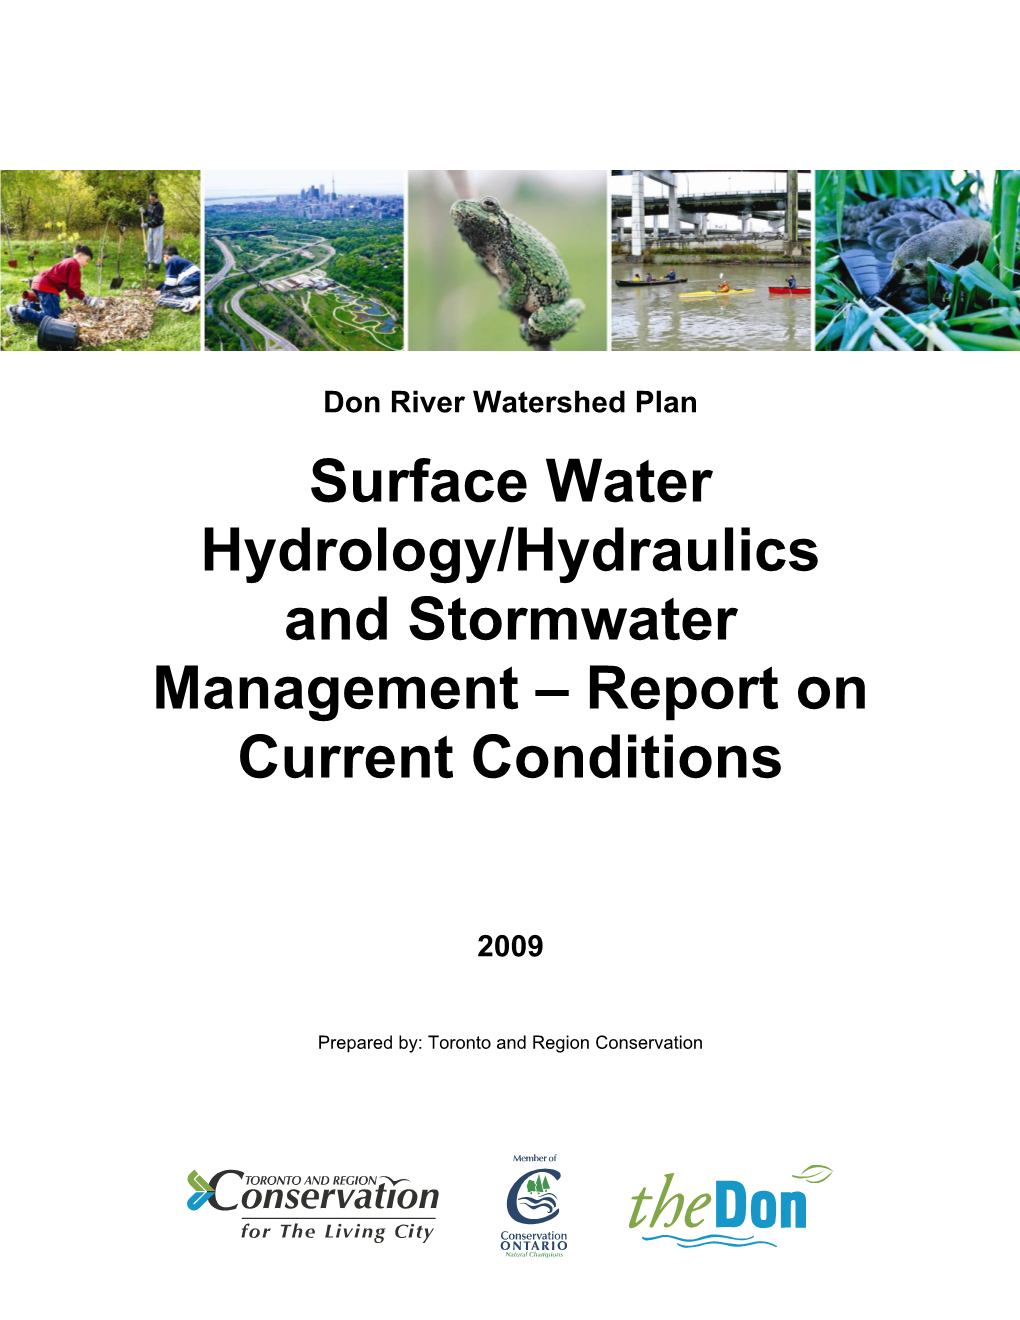 Surface Water Hydrology/Hydraulics and Stormwater Management – Report on Current Conditions